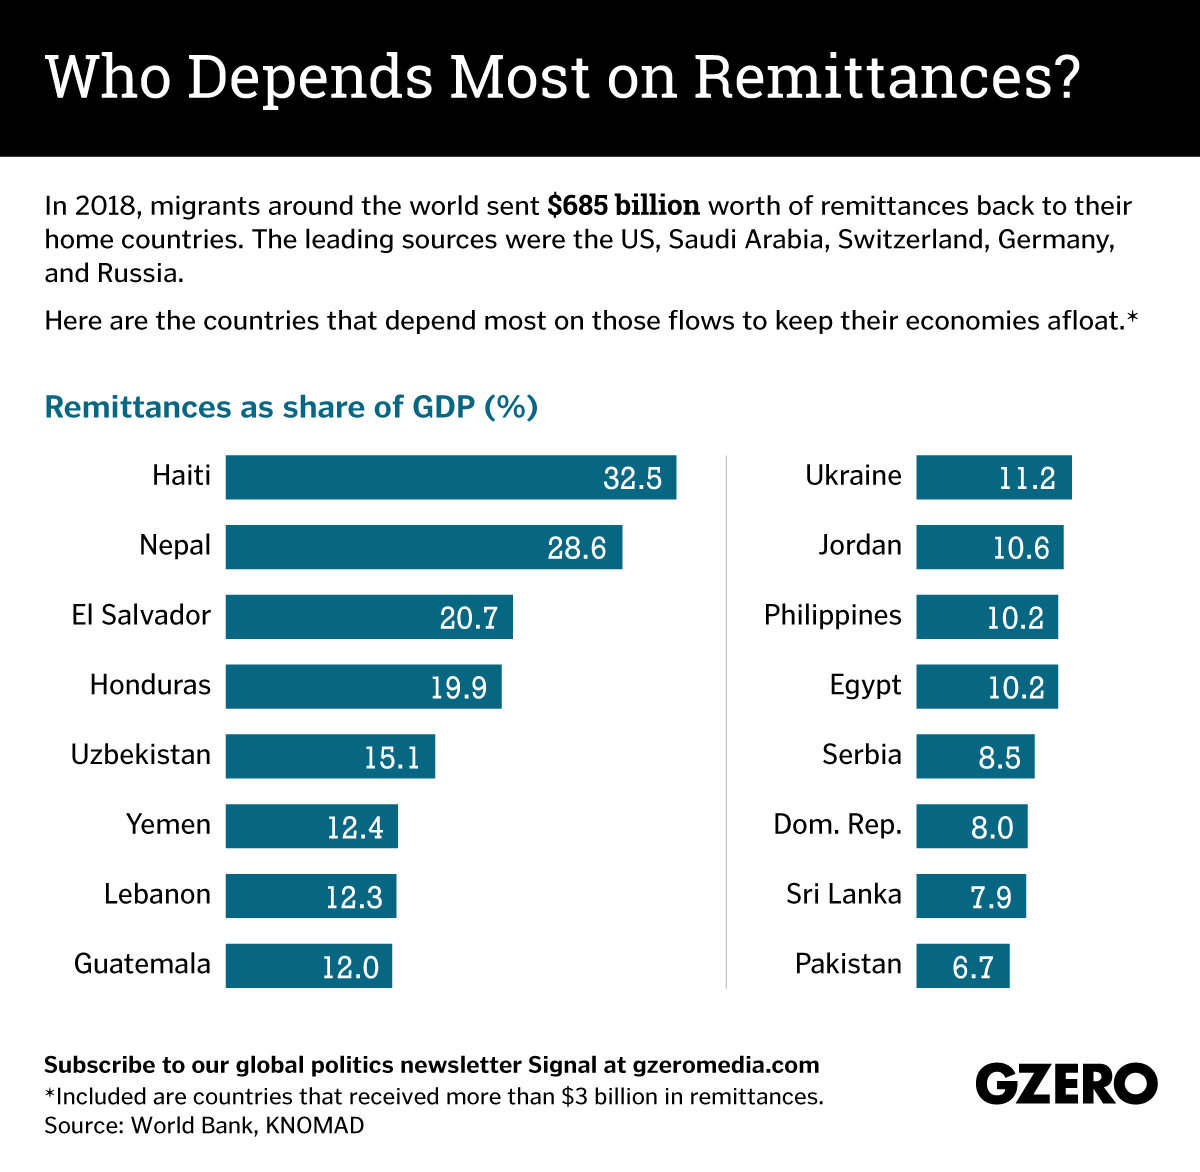 The Graphic Truth: Who depends most on remittances?